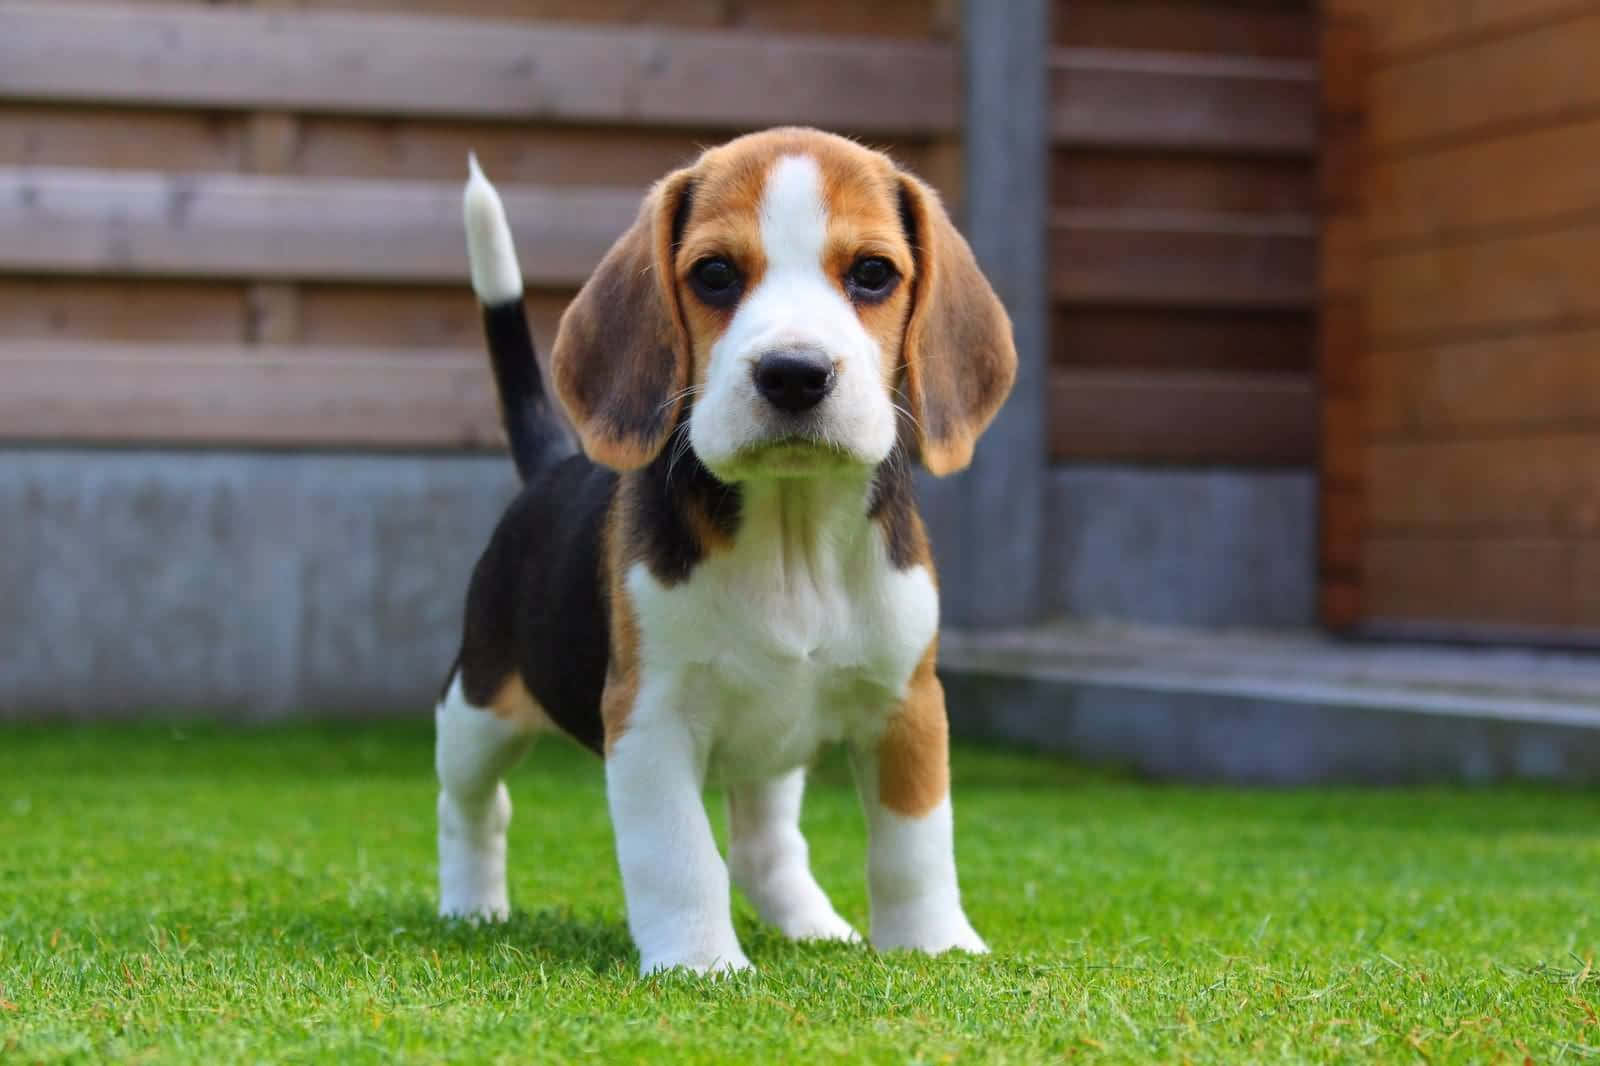 Beagle Puppy Standing On The Grass